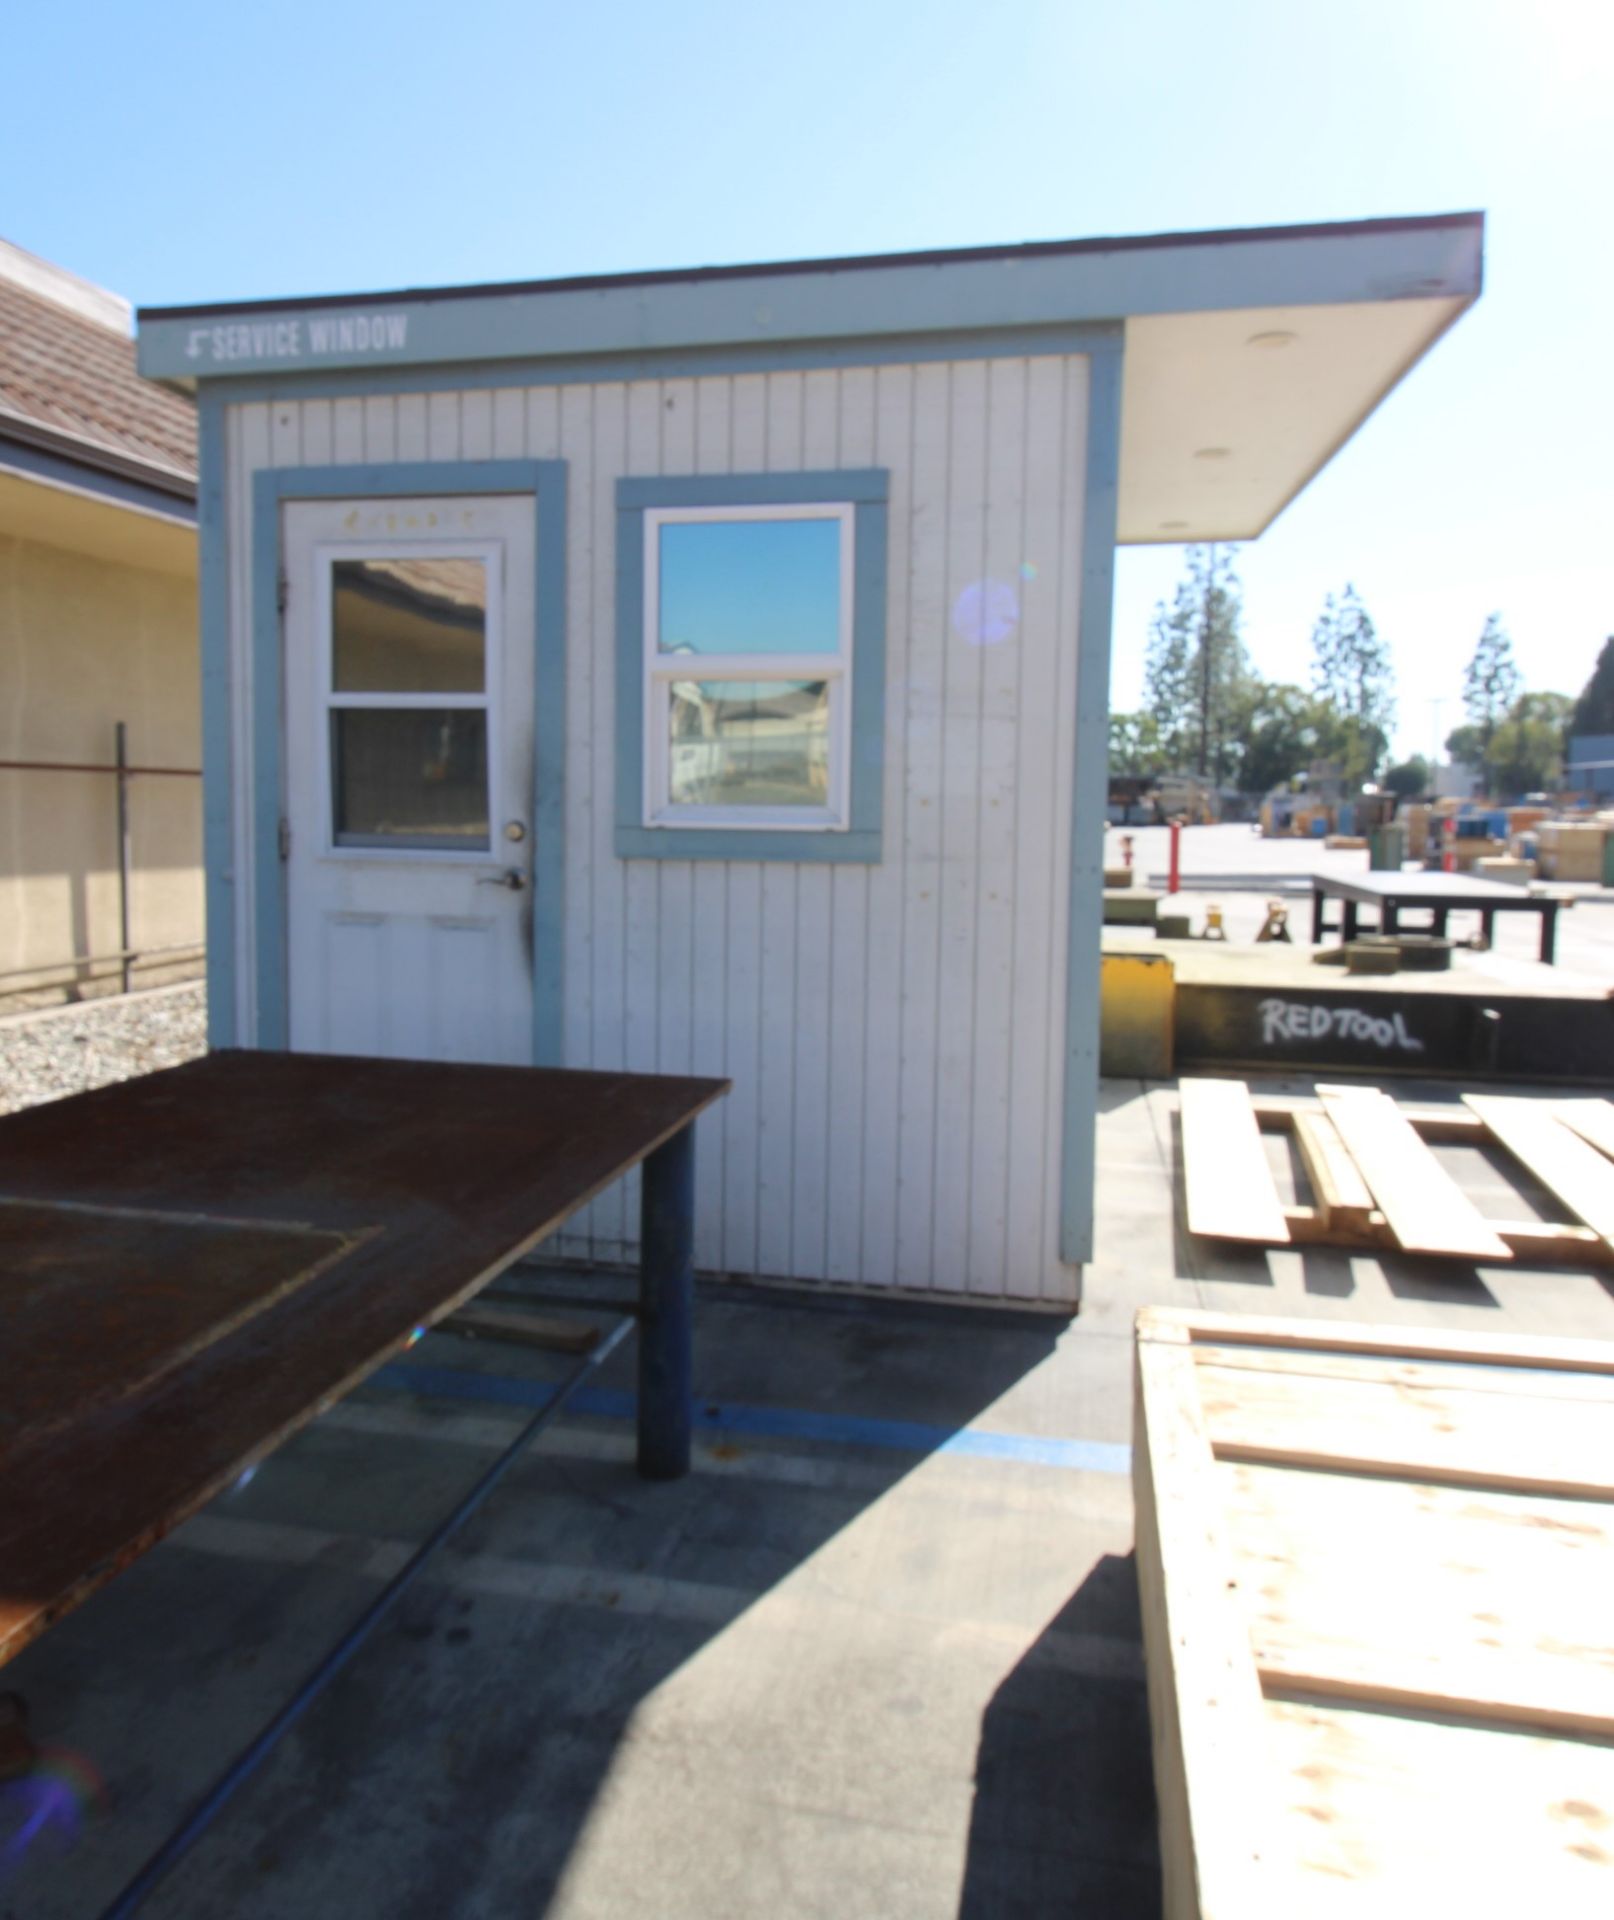 PORTABLE OUTDOOR BUILDING, 8' X 6' INTERIOR DIMS., insulated panel walls, multiple windows, entry - Image 2 of 5